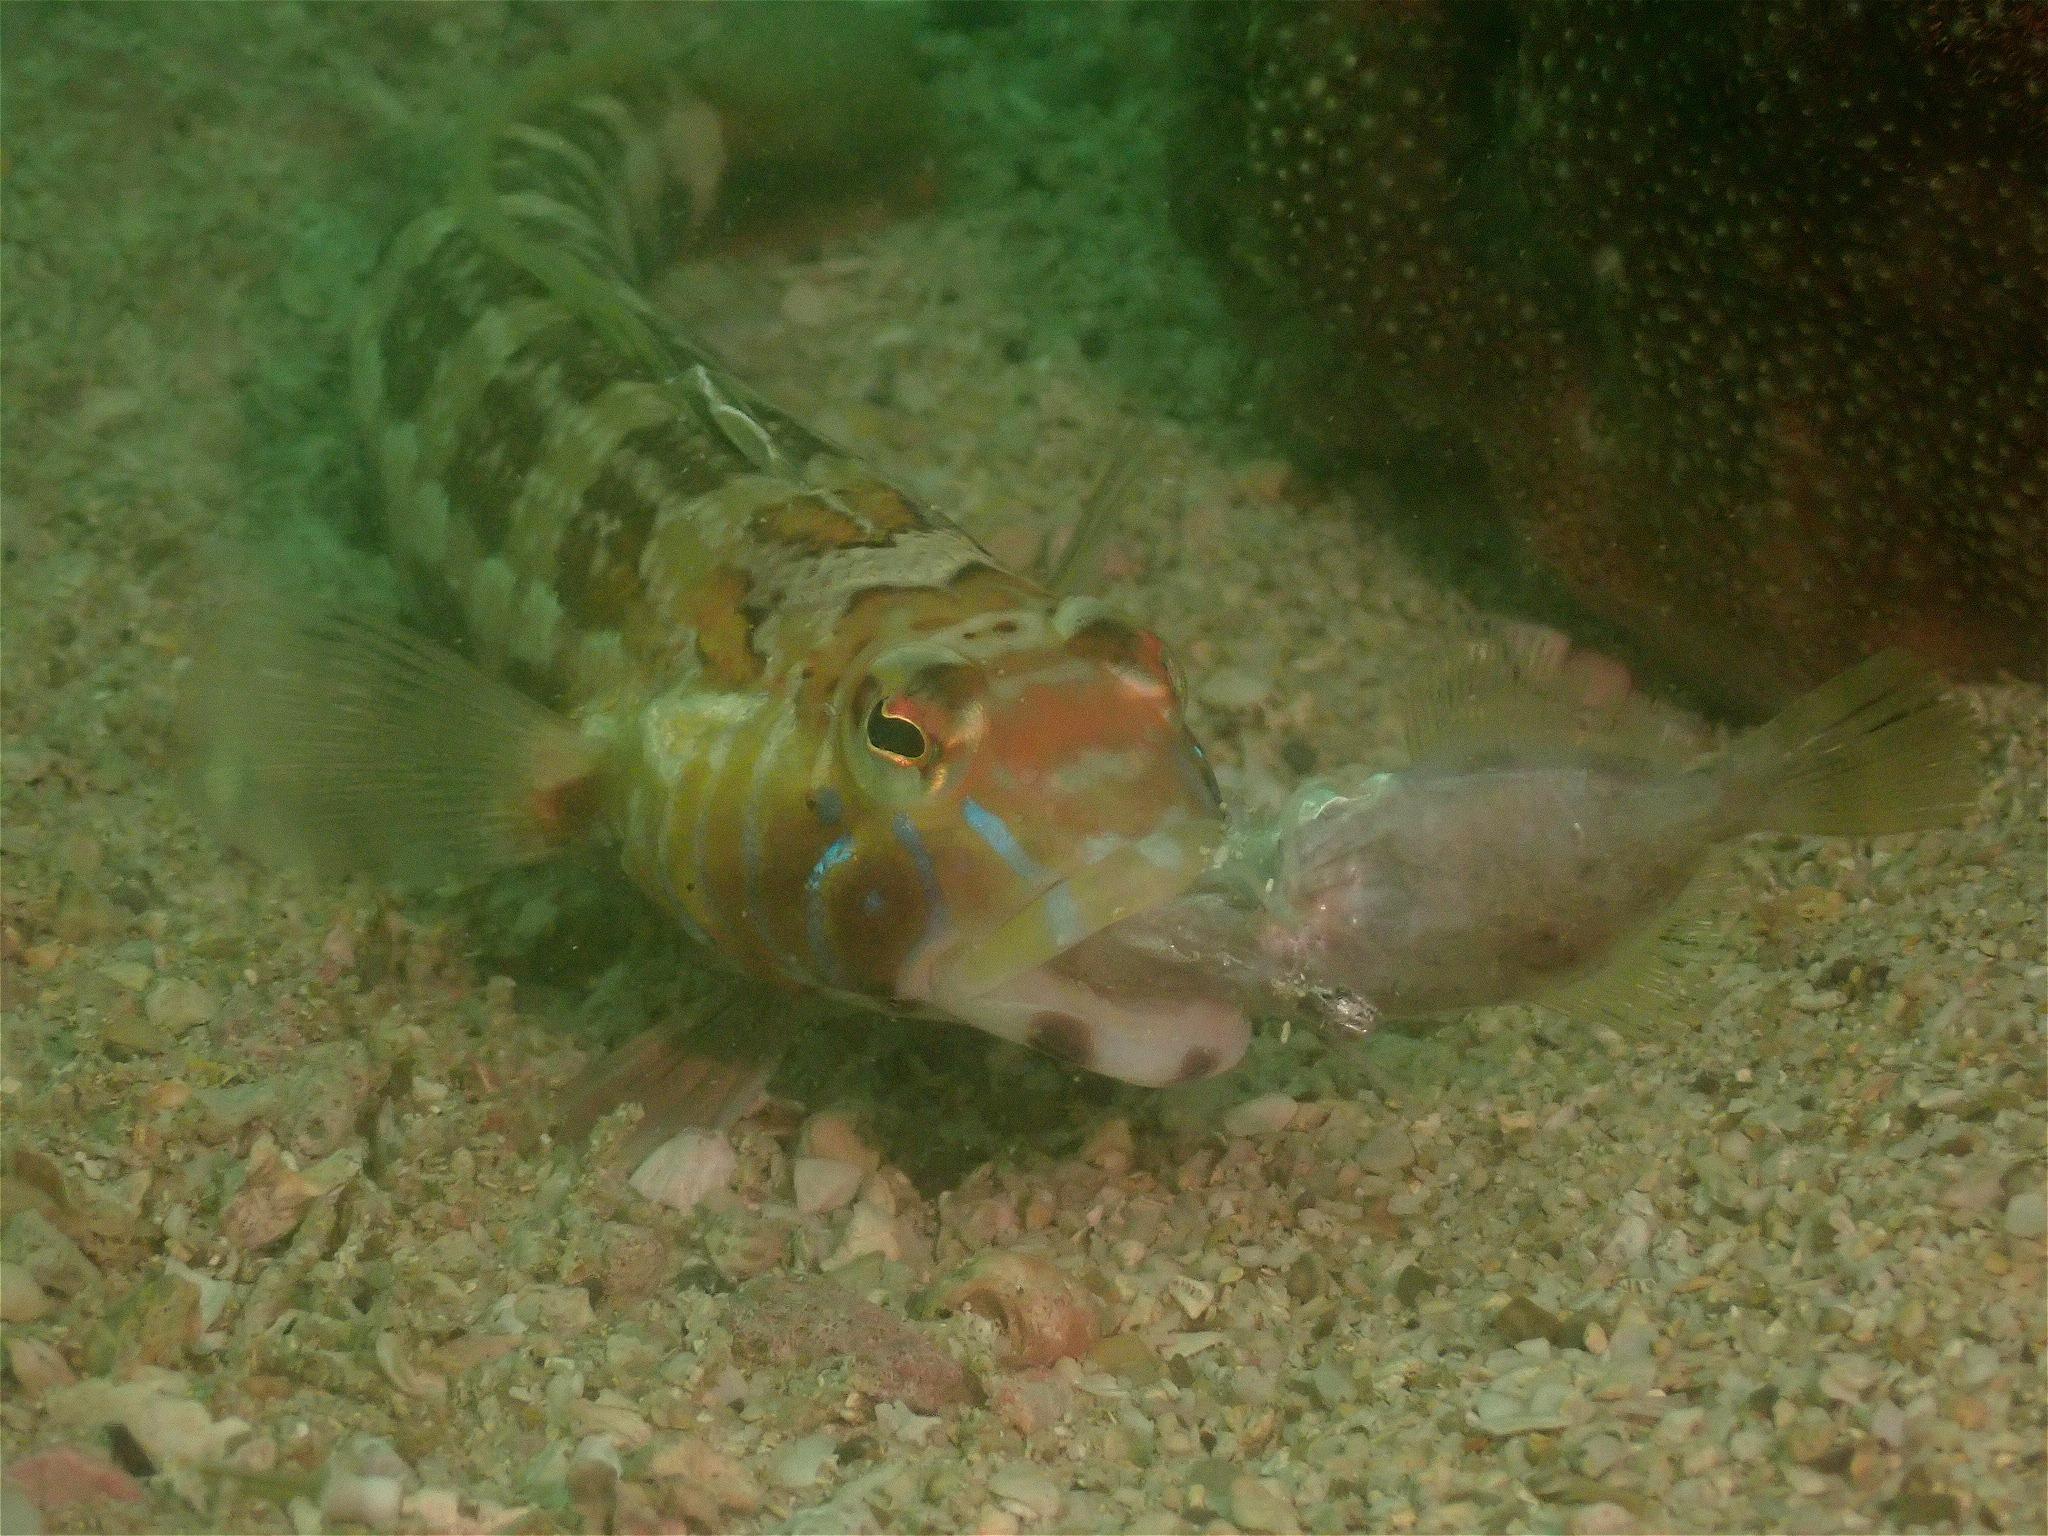 The Agriculture, Fisheries and Conservation Department announced today (December 3) that the results of the Hong Kong Reef Check this year showed that local corals are generally in a healthy condition and that the species diversity remains on the high side. Photo shows a sandperch at Ninepin Group.